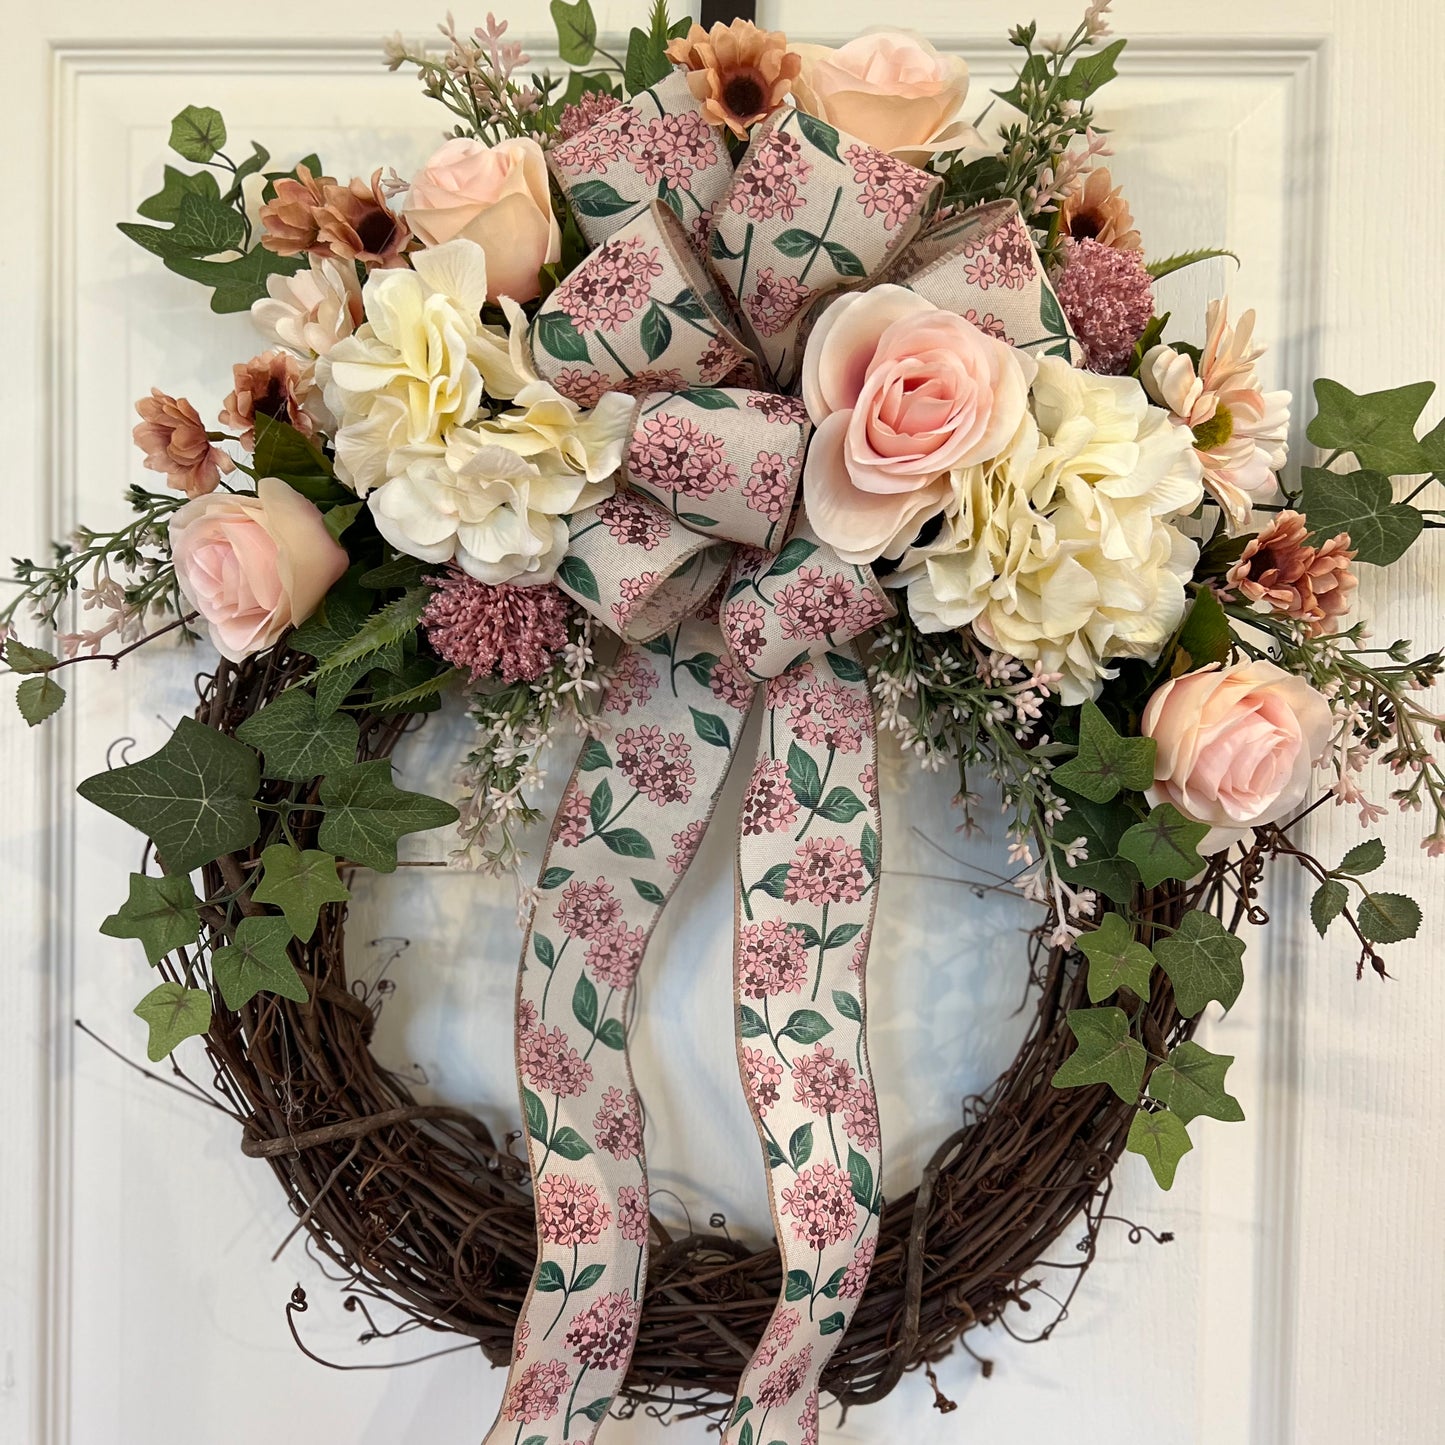 Spring Wreath (Free Local Delivery)